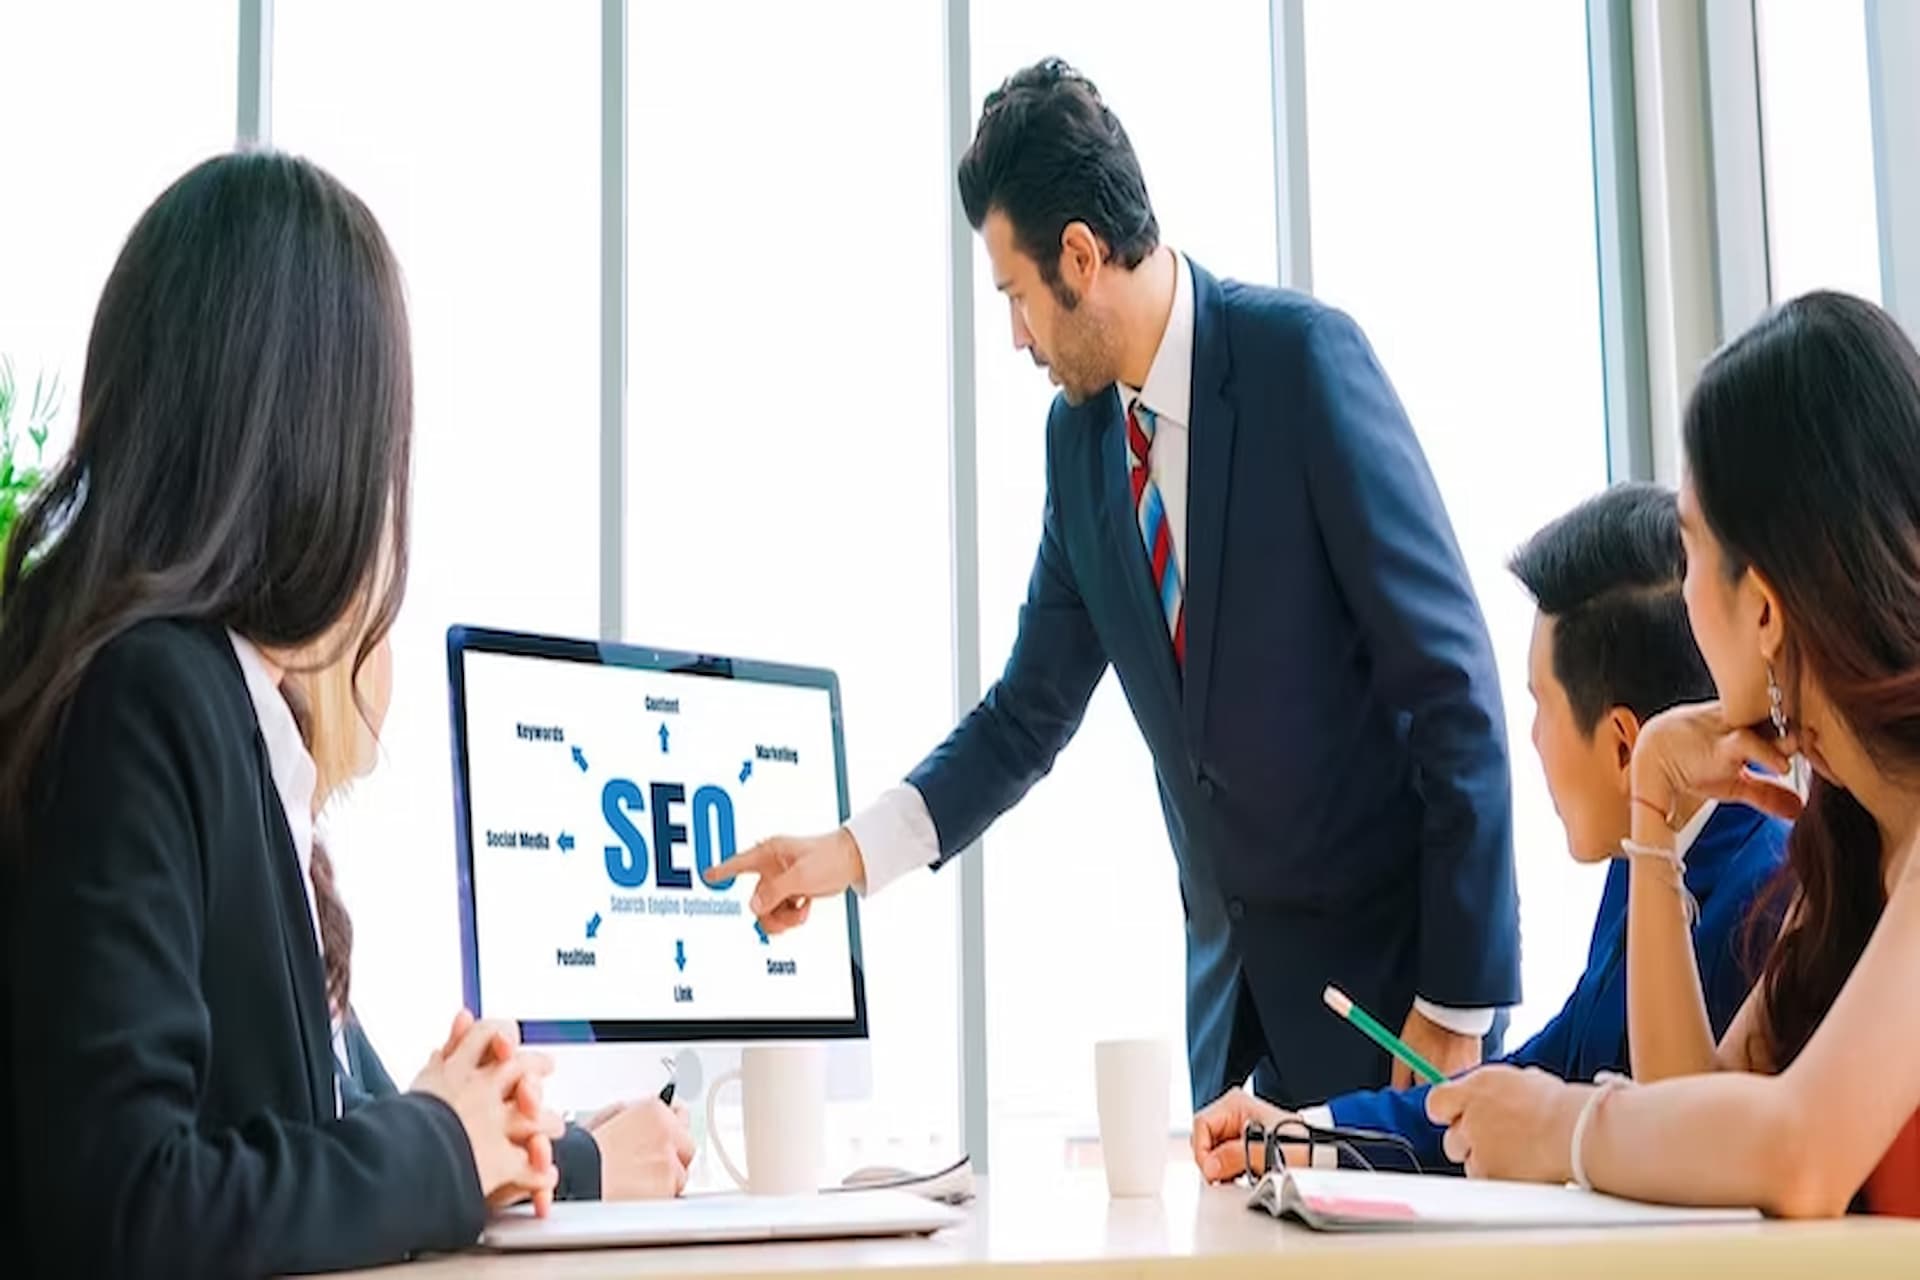 The Ultimate Guide To Using An Online URL Extractor For SEO Success